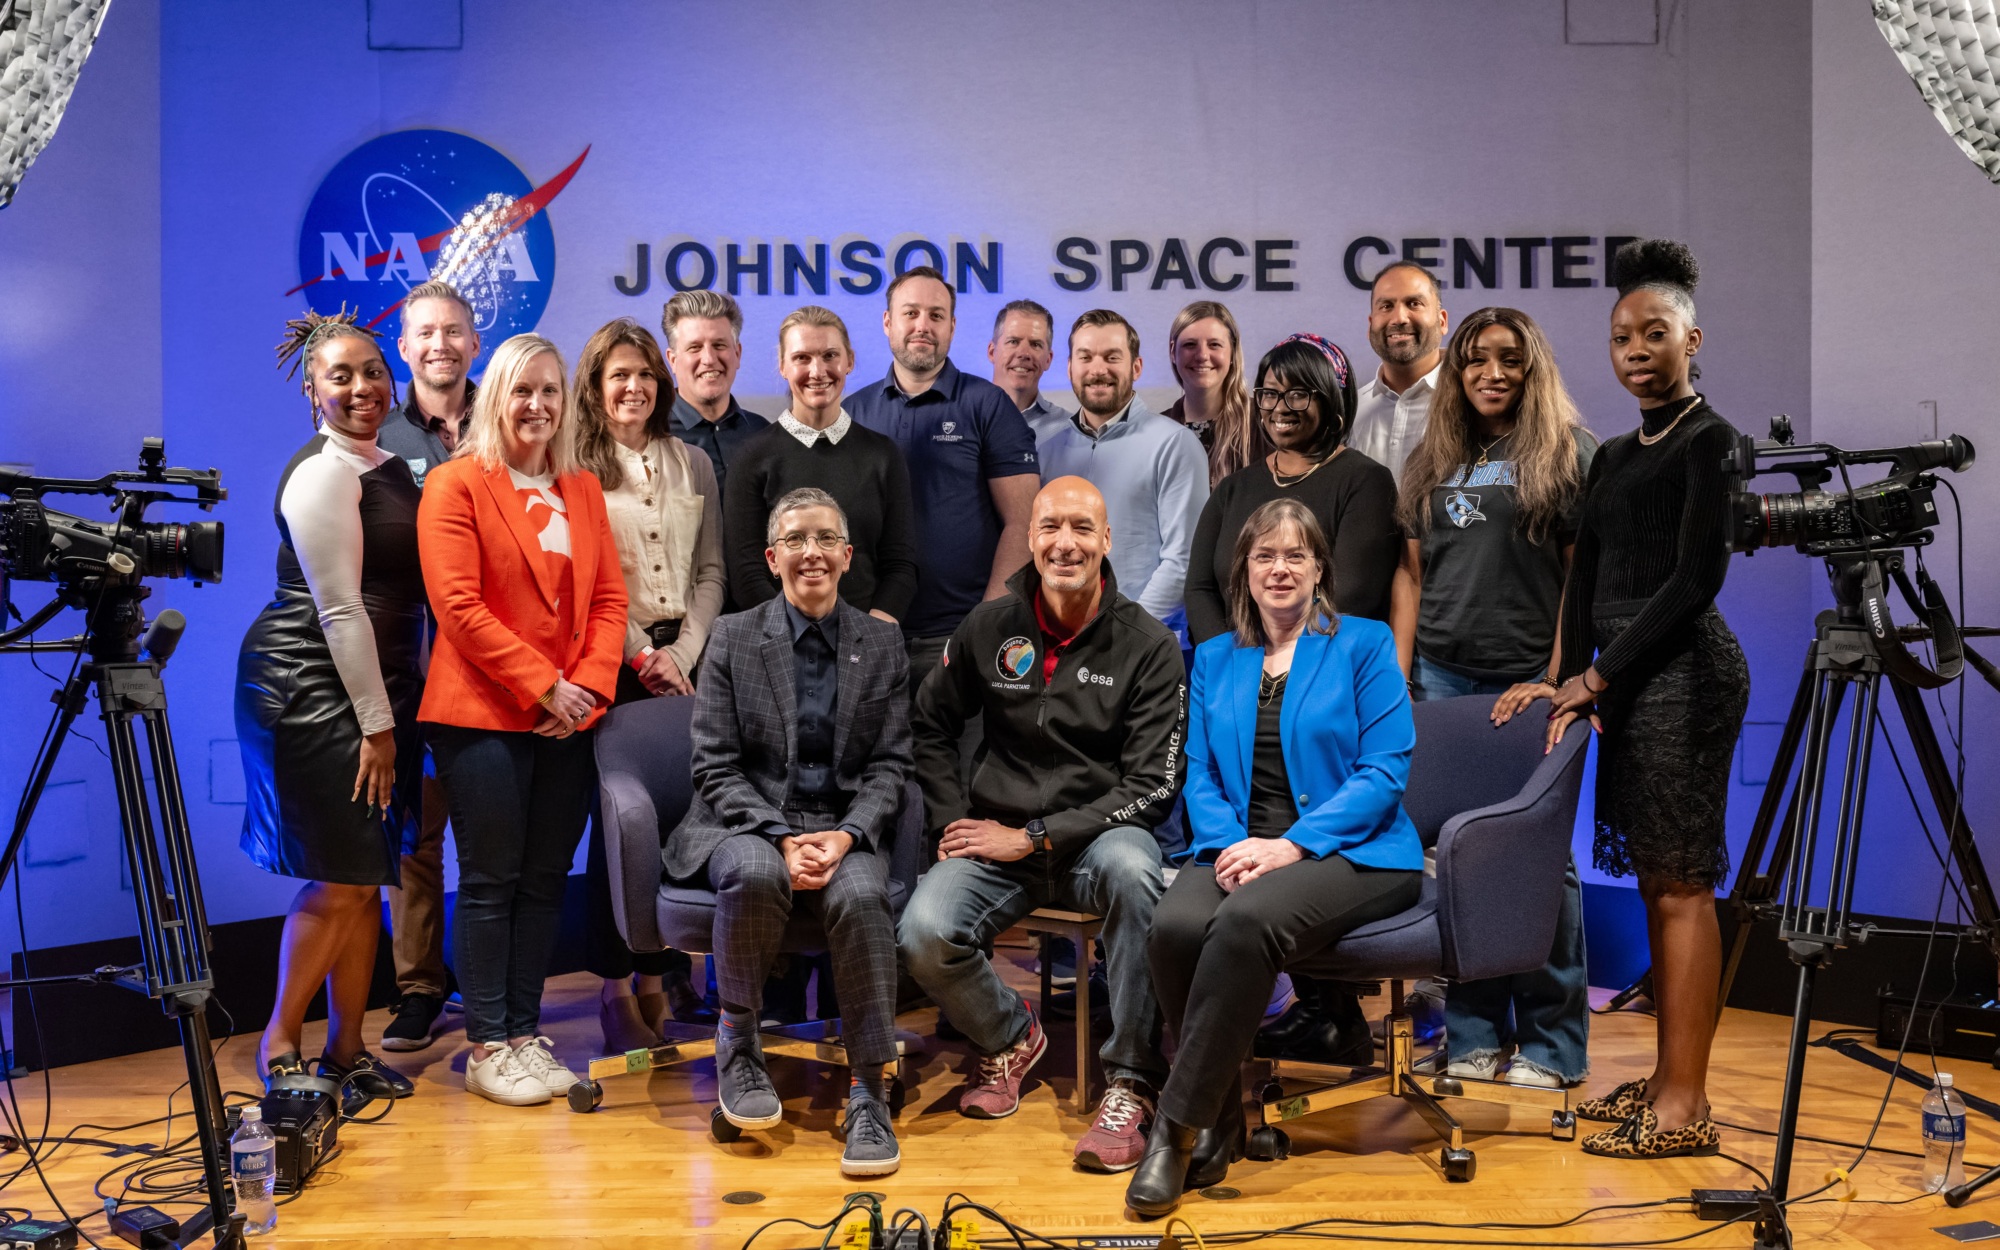 group of people sitting and standing posing for photo in front of johnson space center logo